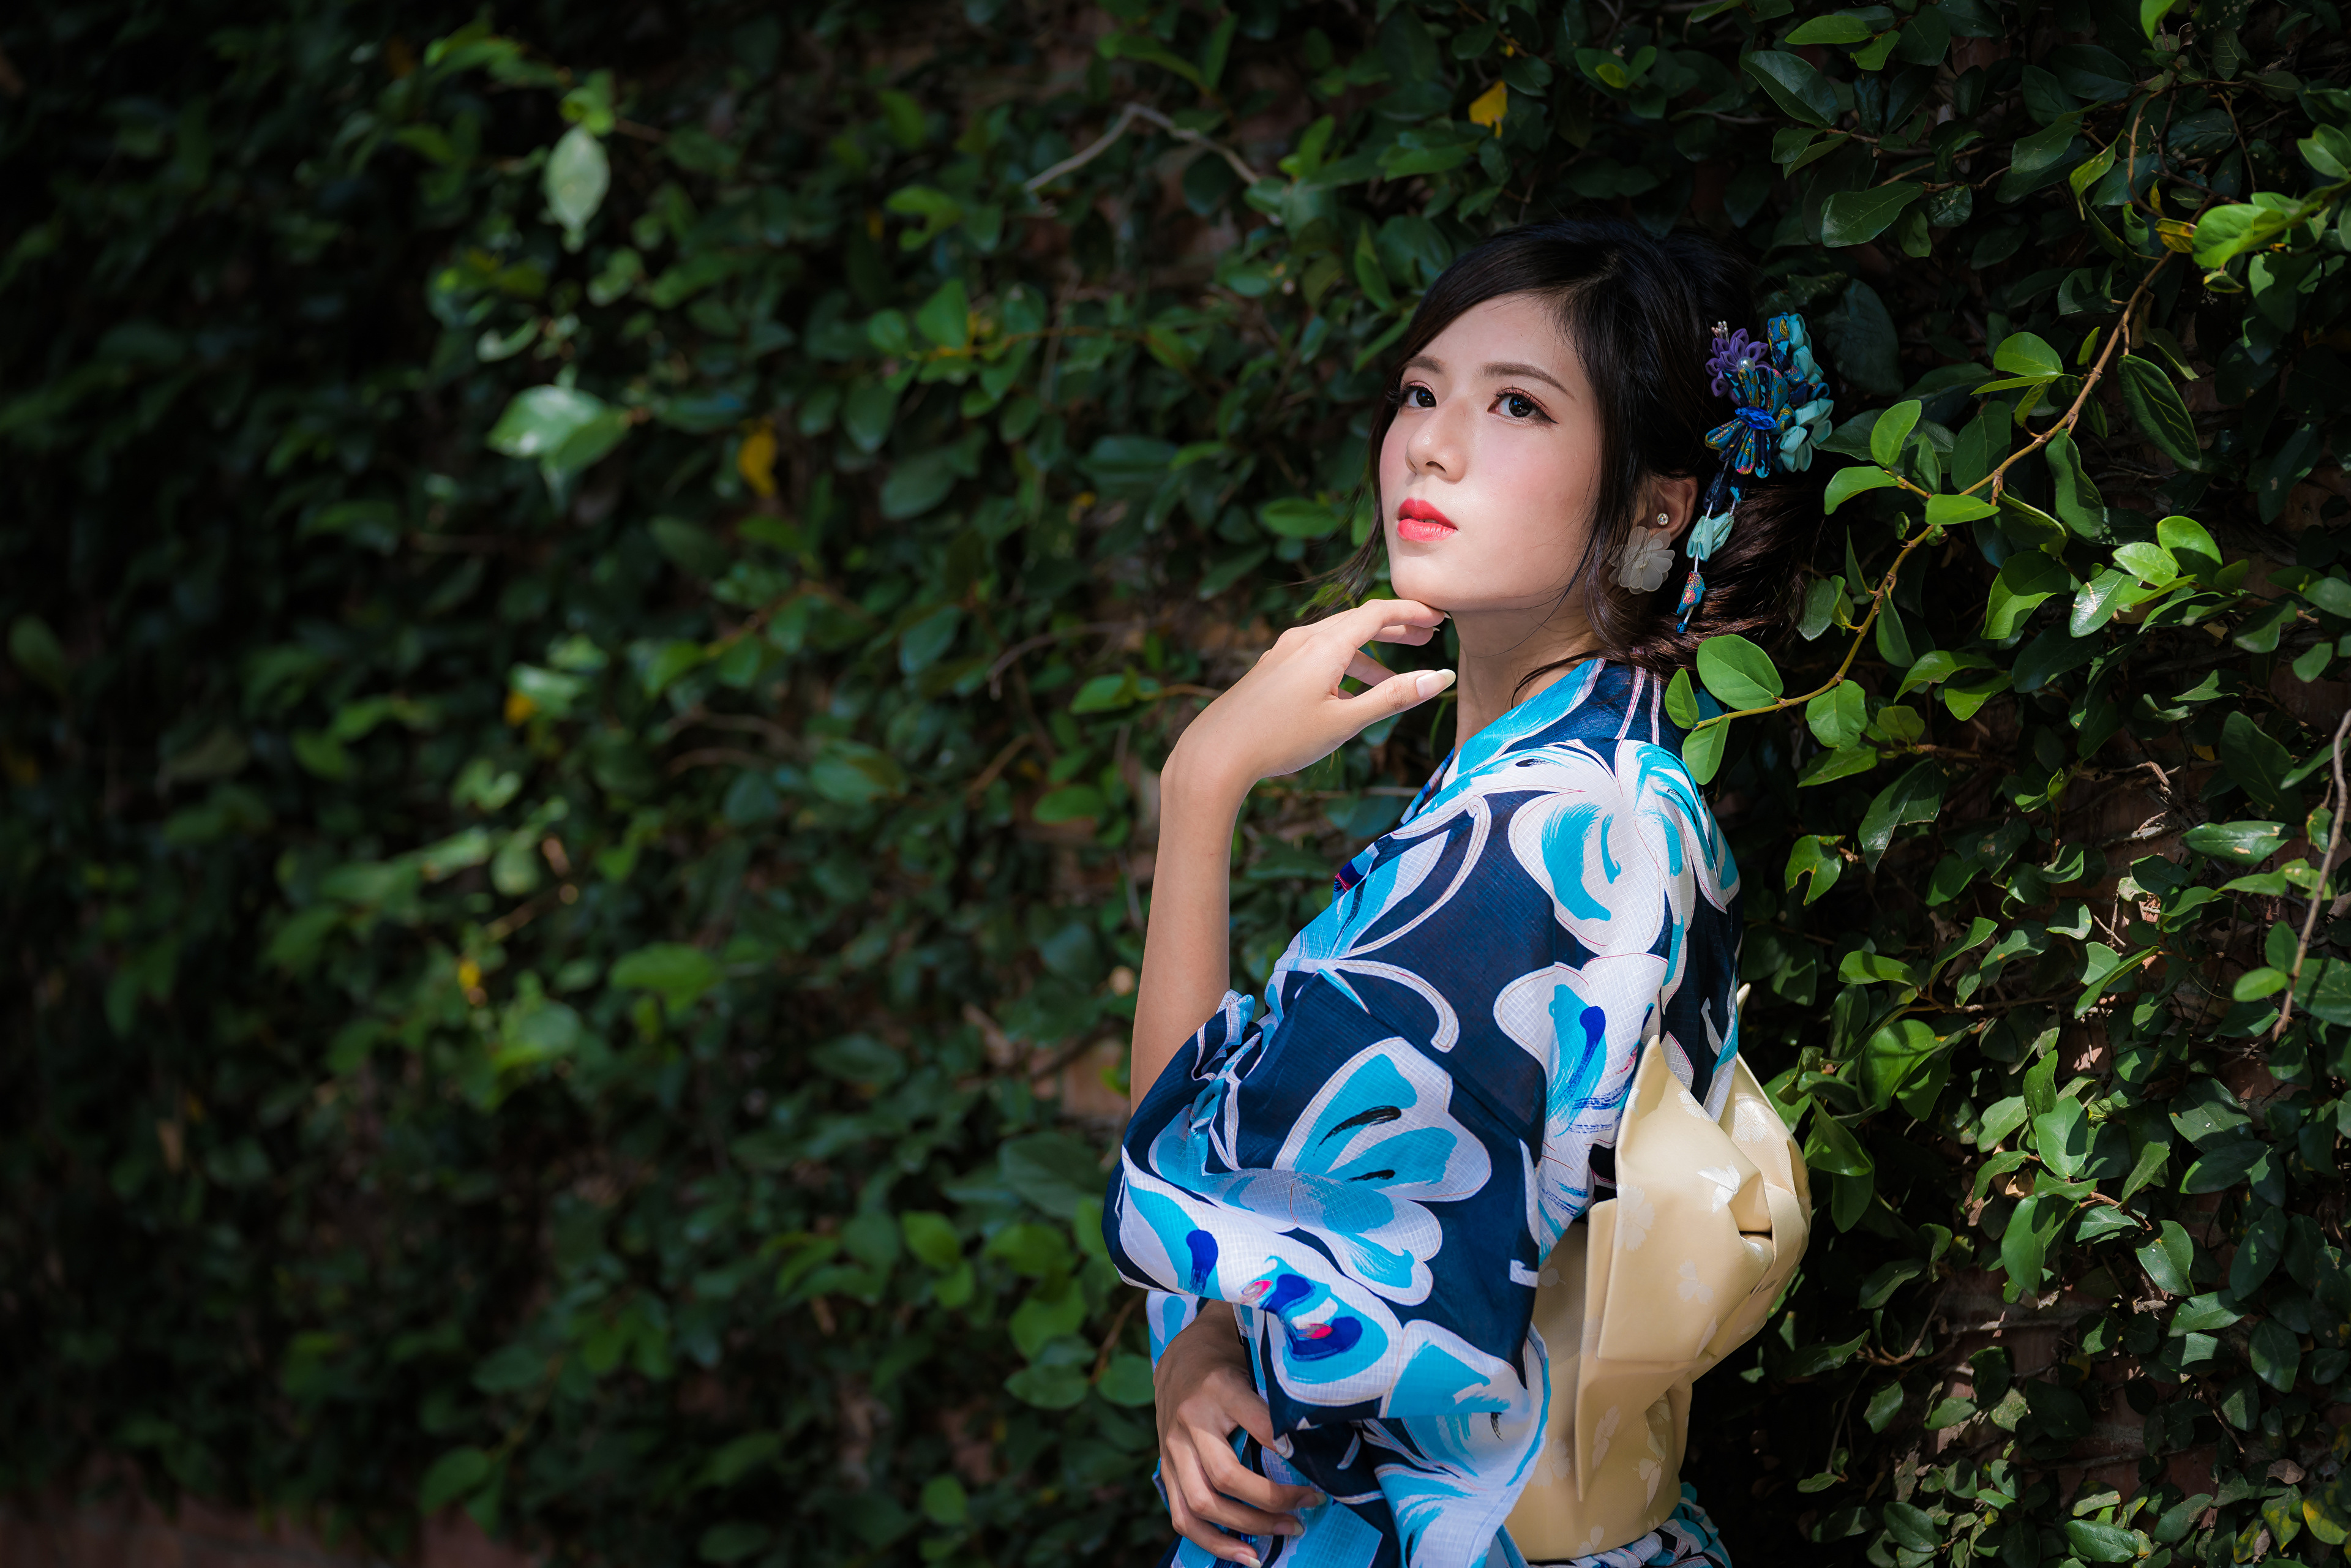 Asian Women Model Long Hair Brunette Traditional Clothing Earring Hair Pins Bushes Looking Into The  3840x2561